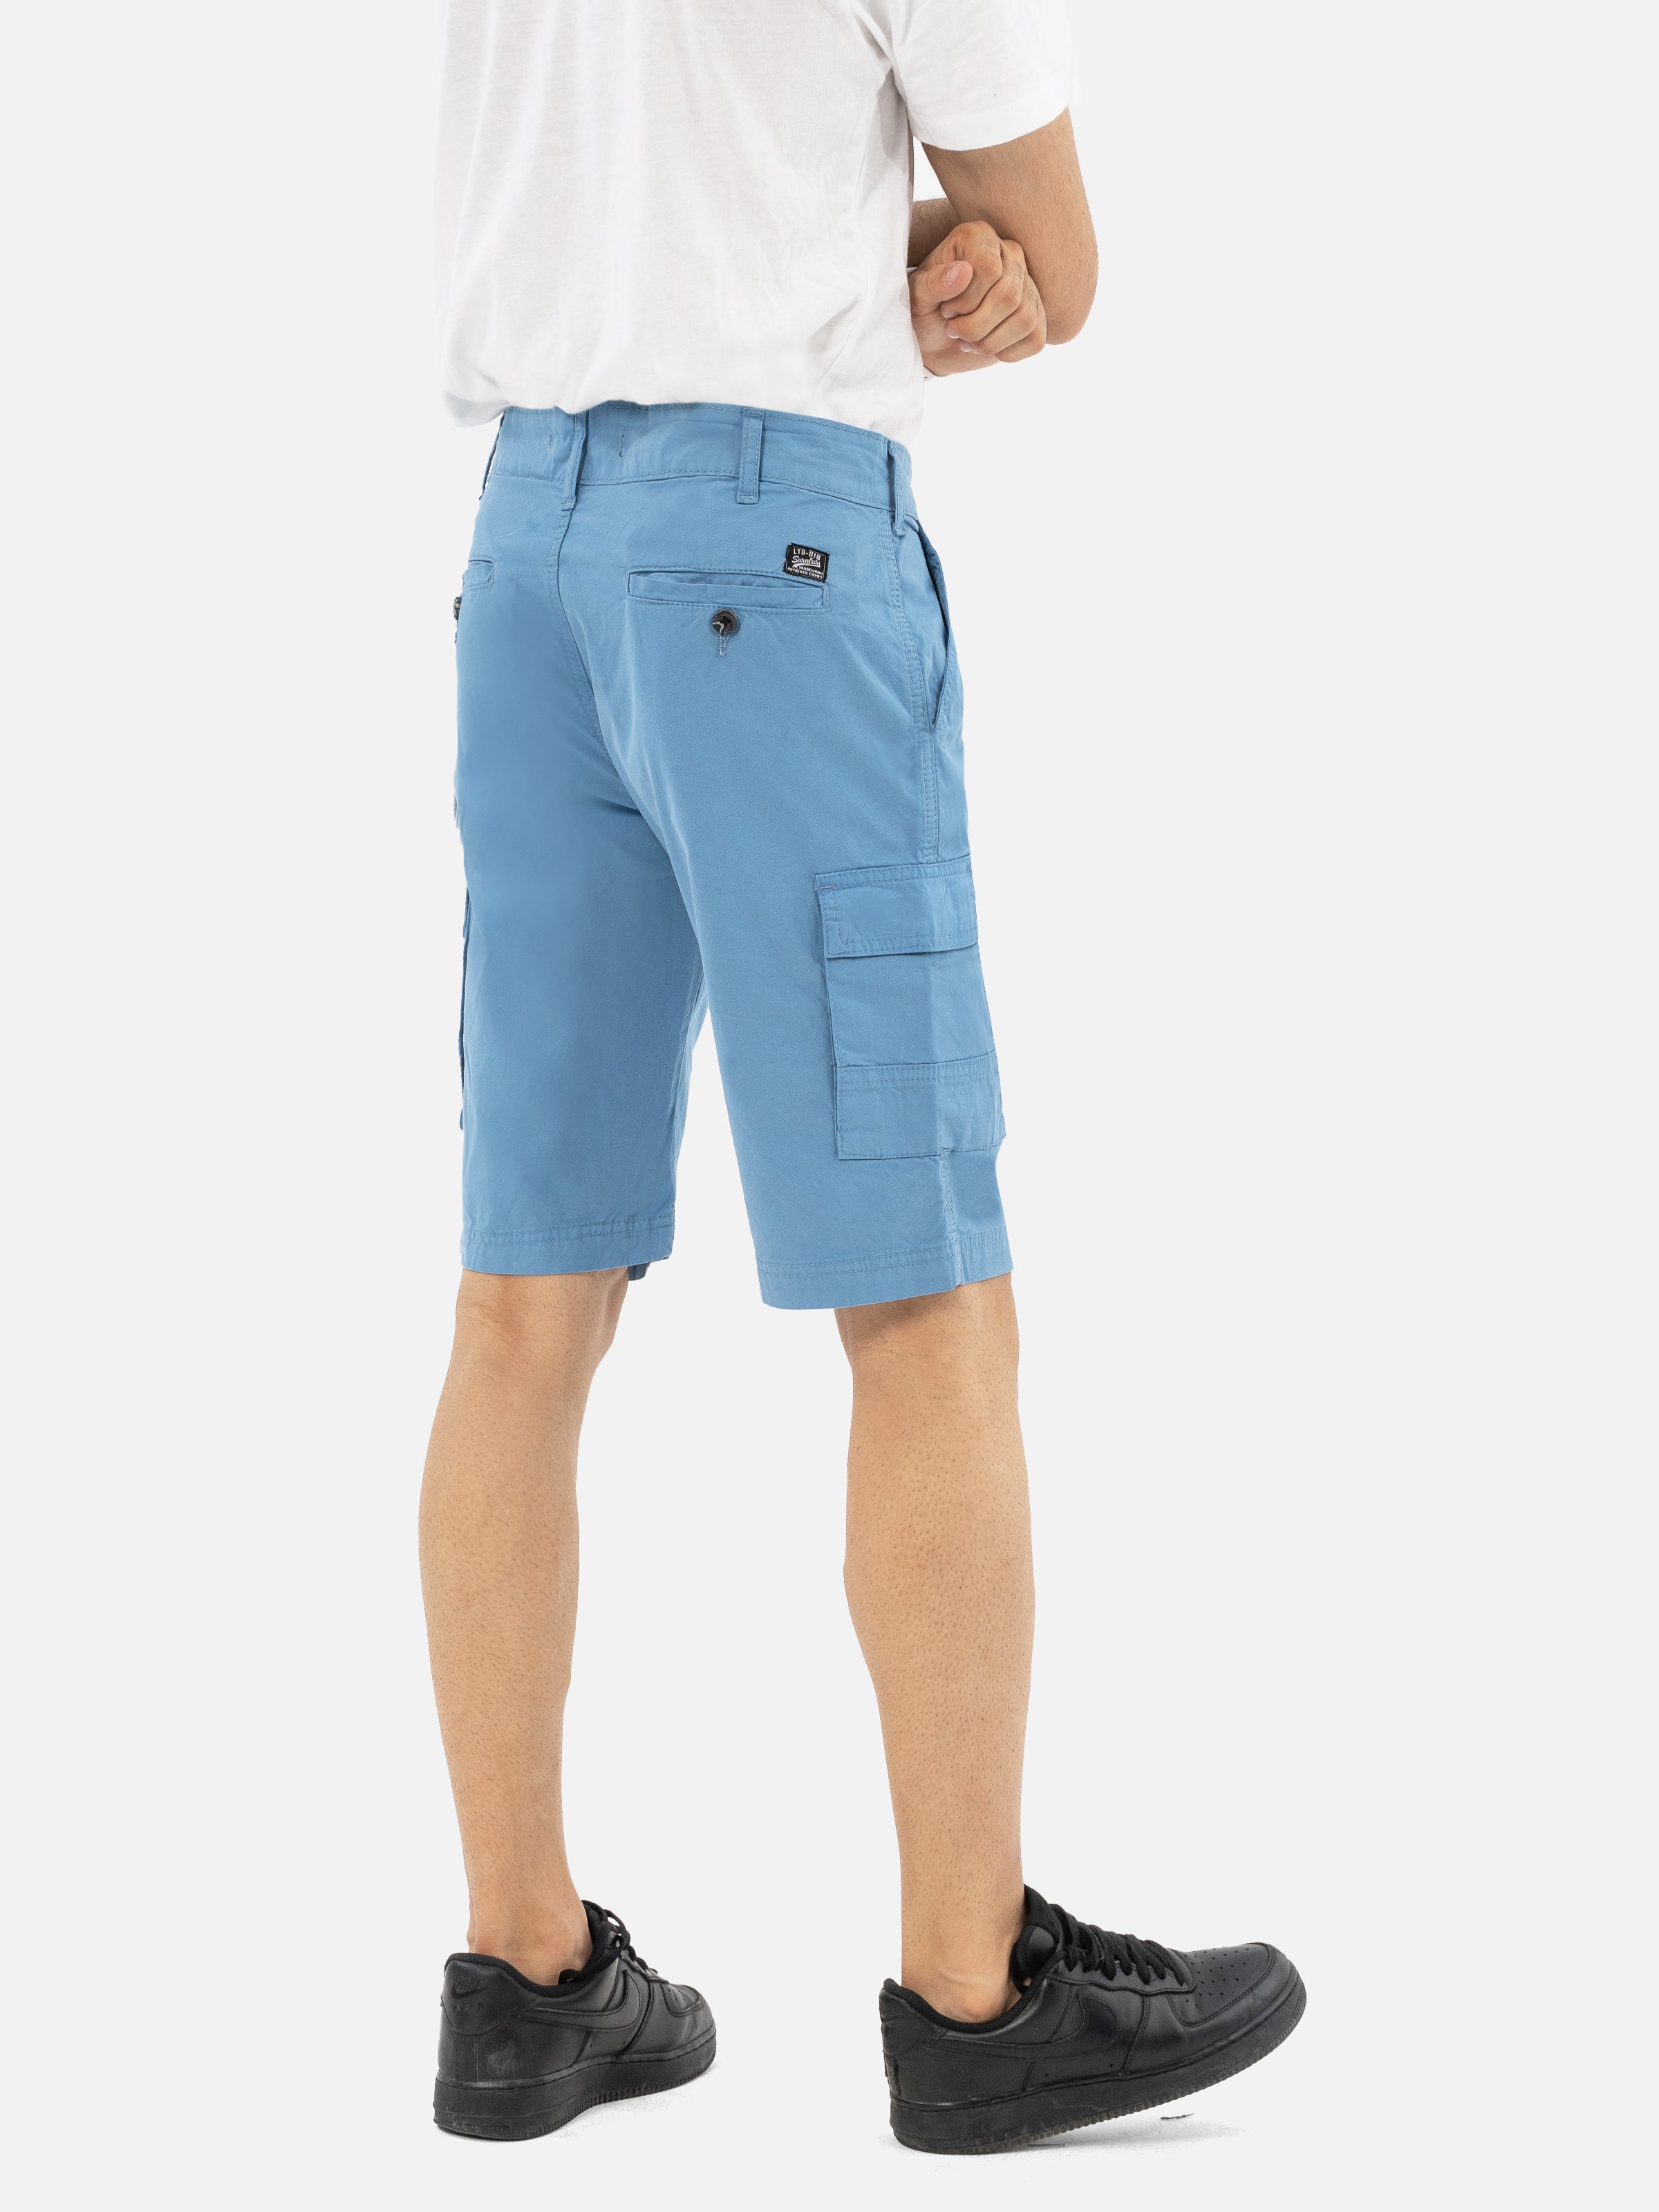 CASUAL SHORTS SMART FIT SKY BLUE